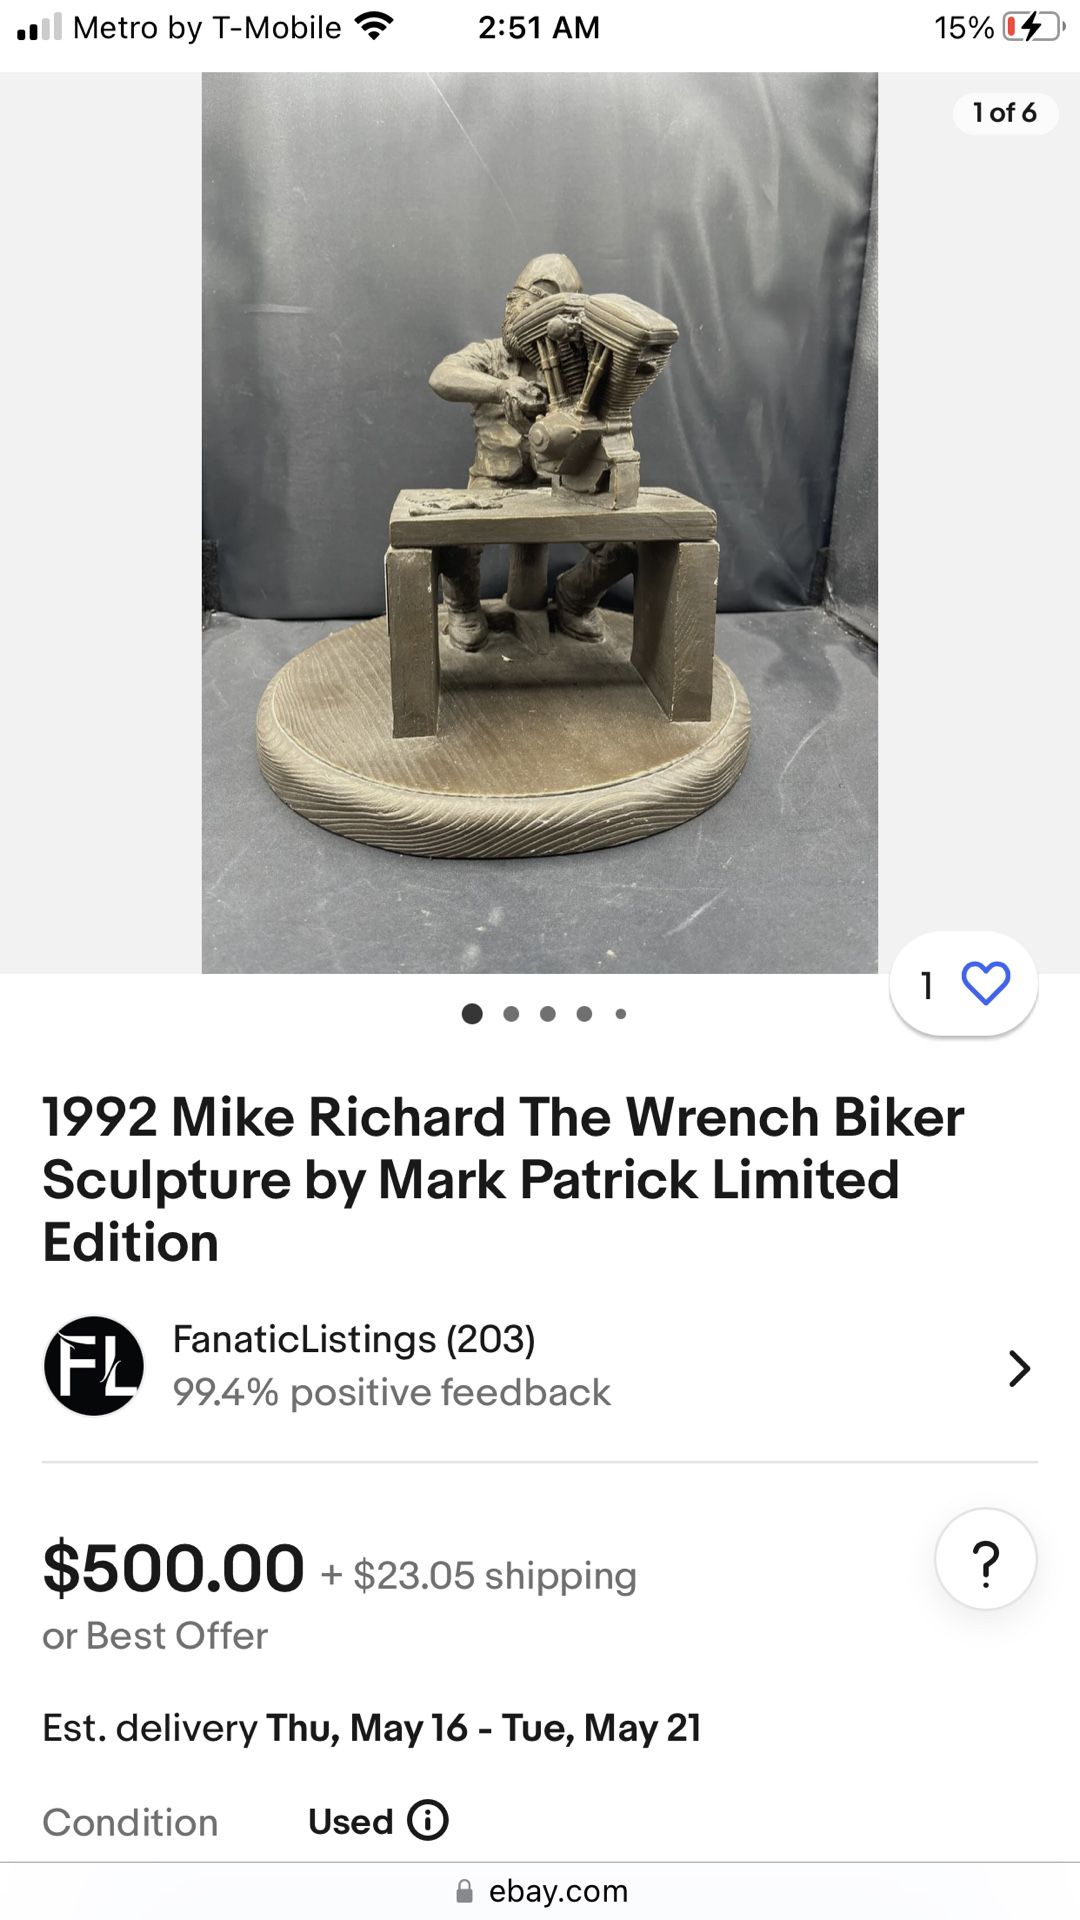 1992 Mike Richard The Wrench Biker Sculpture By Mark Patrick Limited Edition